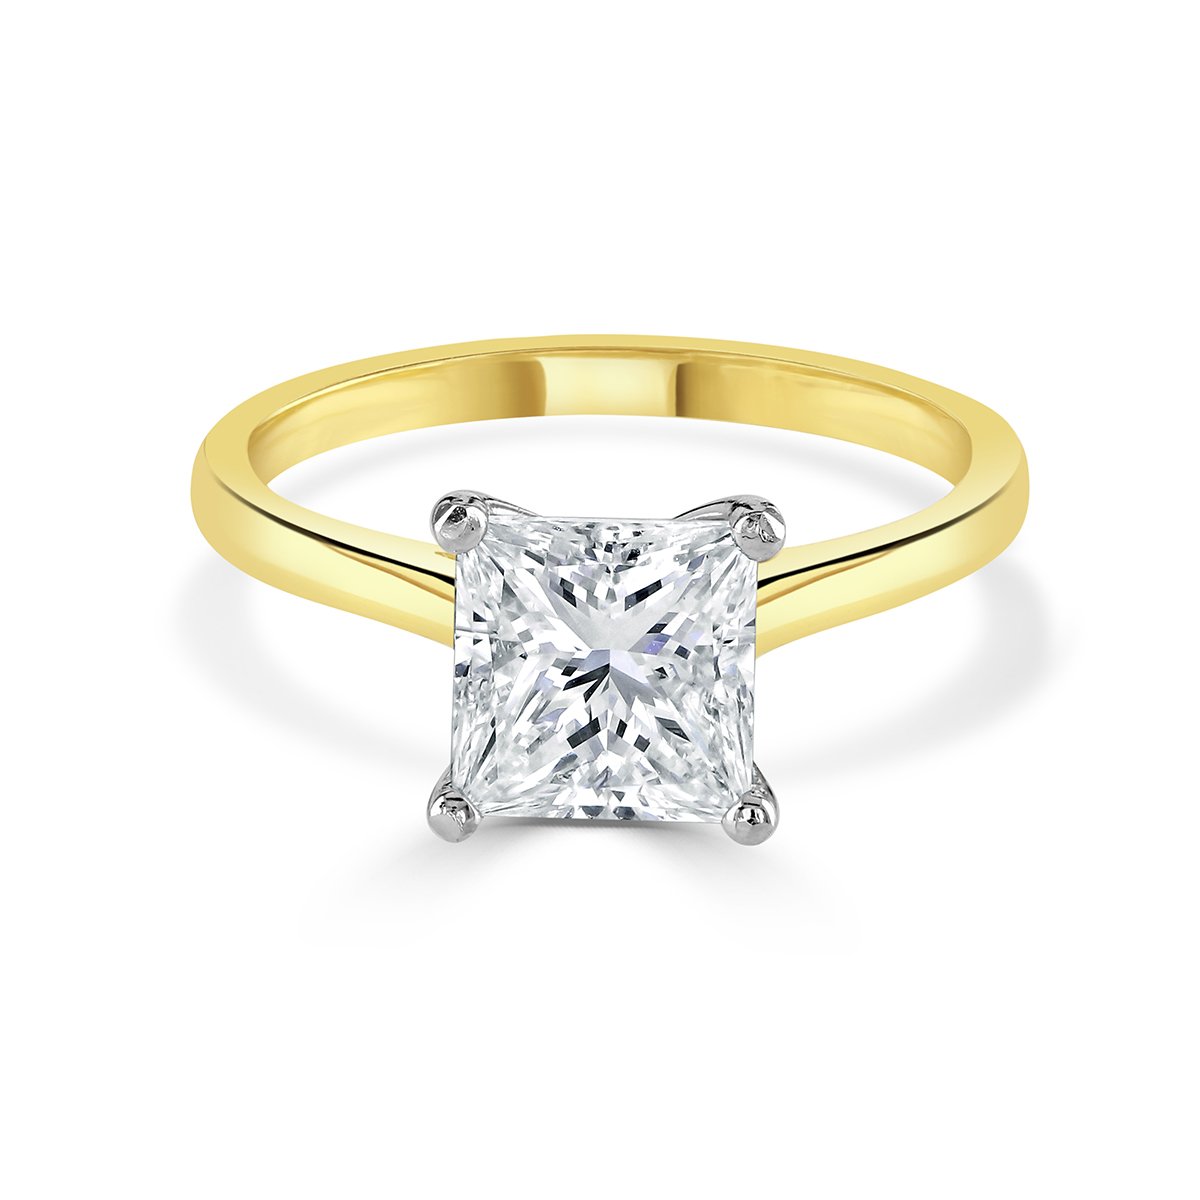 Engagement Ring Trends You’ll Love